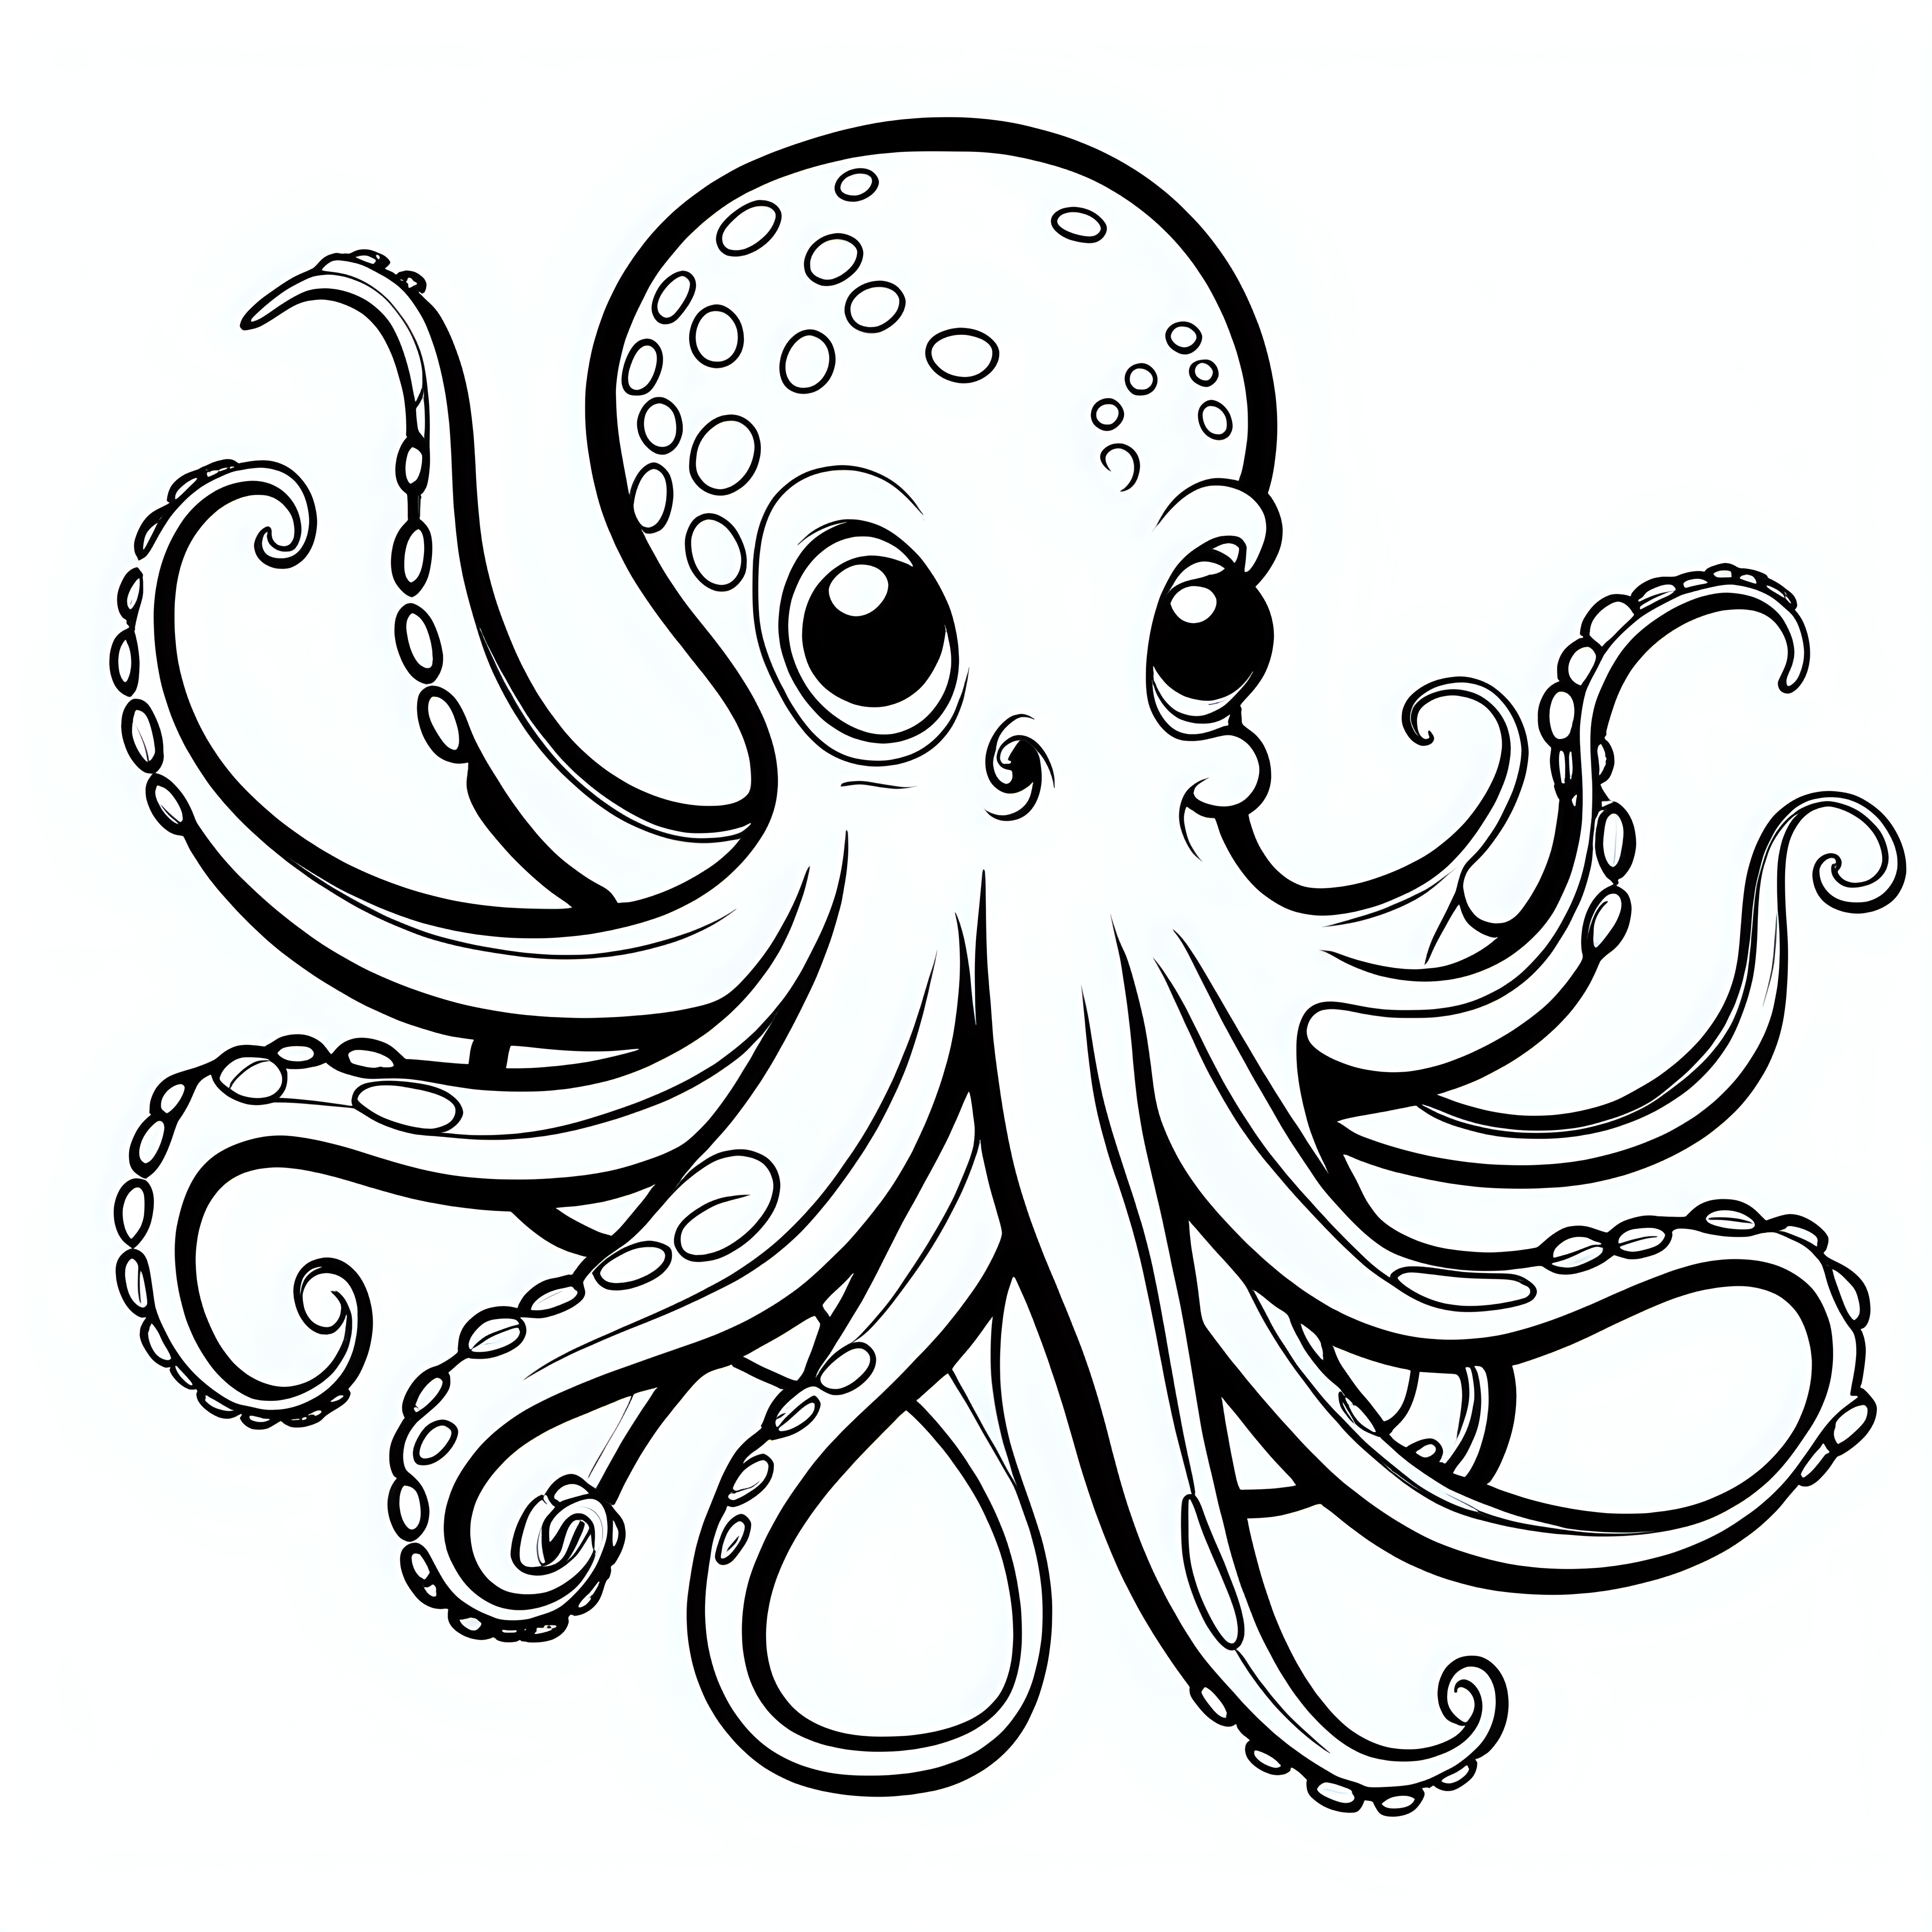 draw an octopus with only the outline for